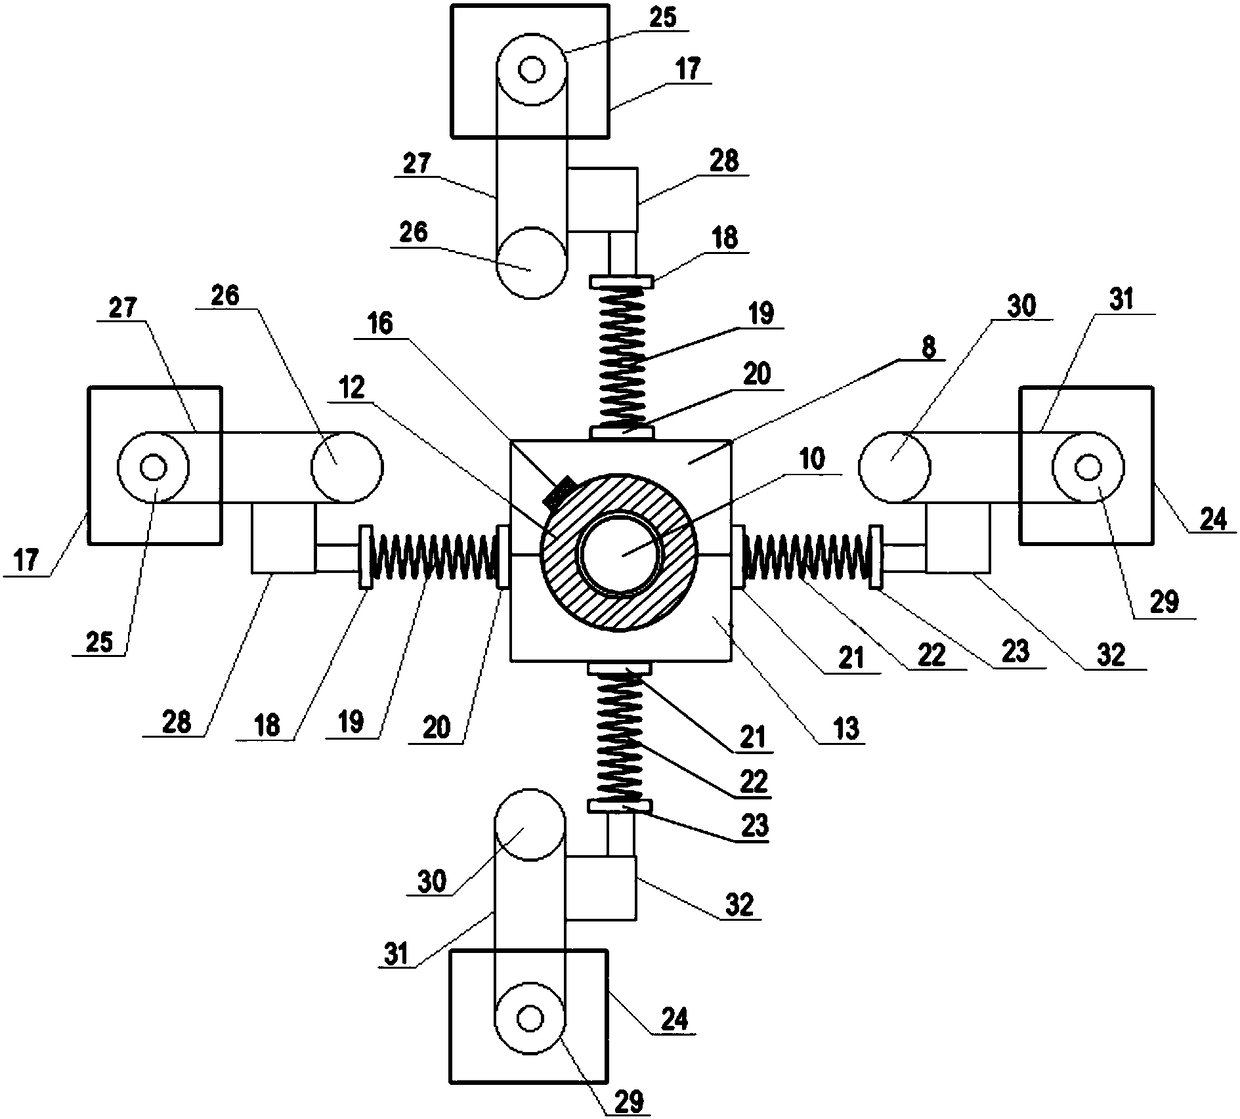 Rolling bearing performance test device based on belt drive with radial alternating load